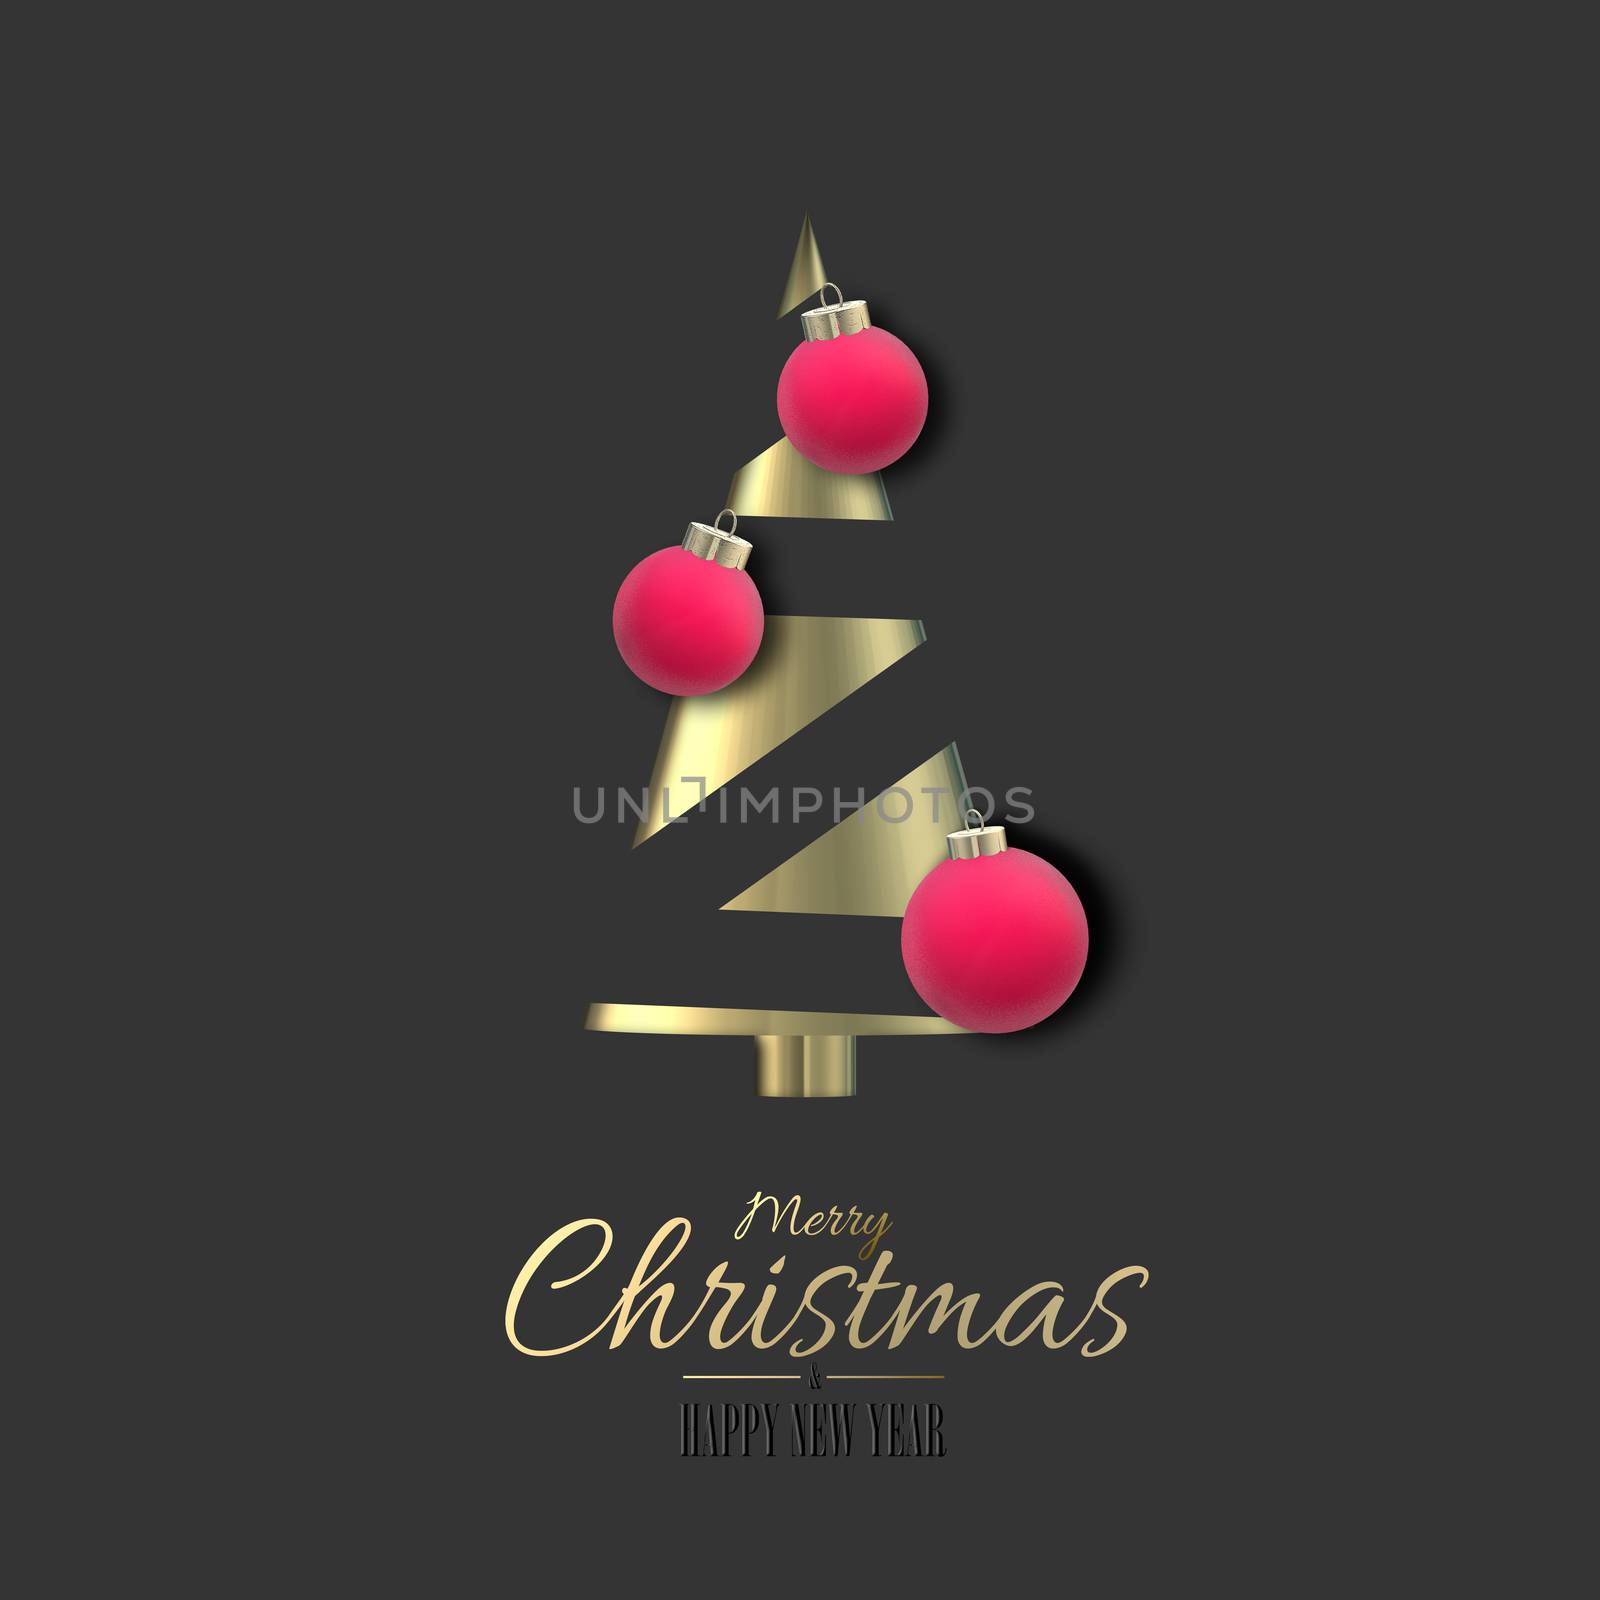 Abstract 3D Christmas card. Gold Xmas tree, pink Xmas balls baubles on black background. Text Merry Christmas Happy New Year. 3D illustration luxury card.